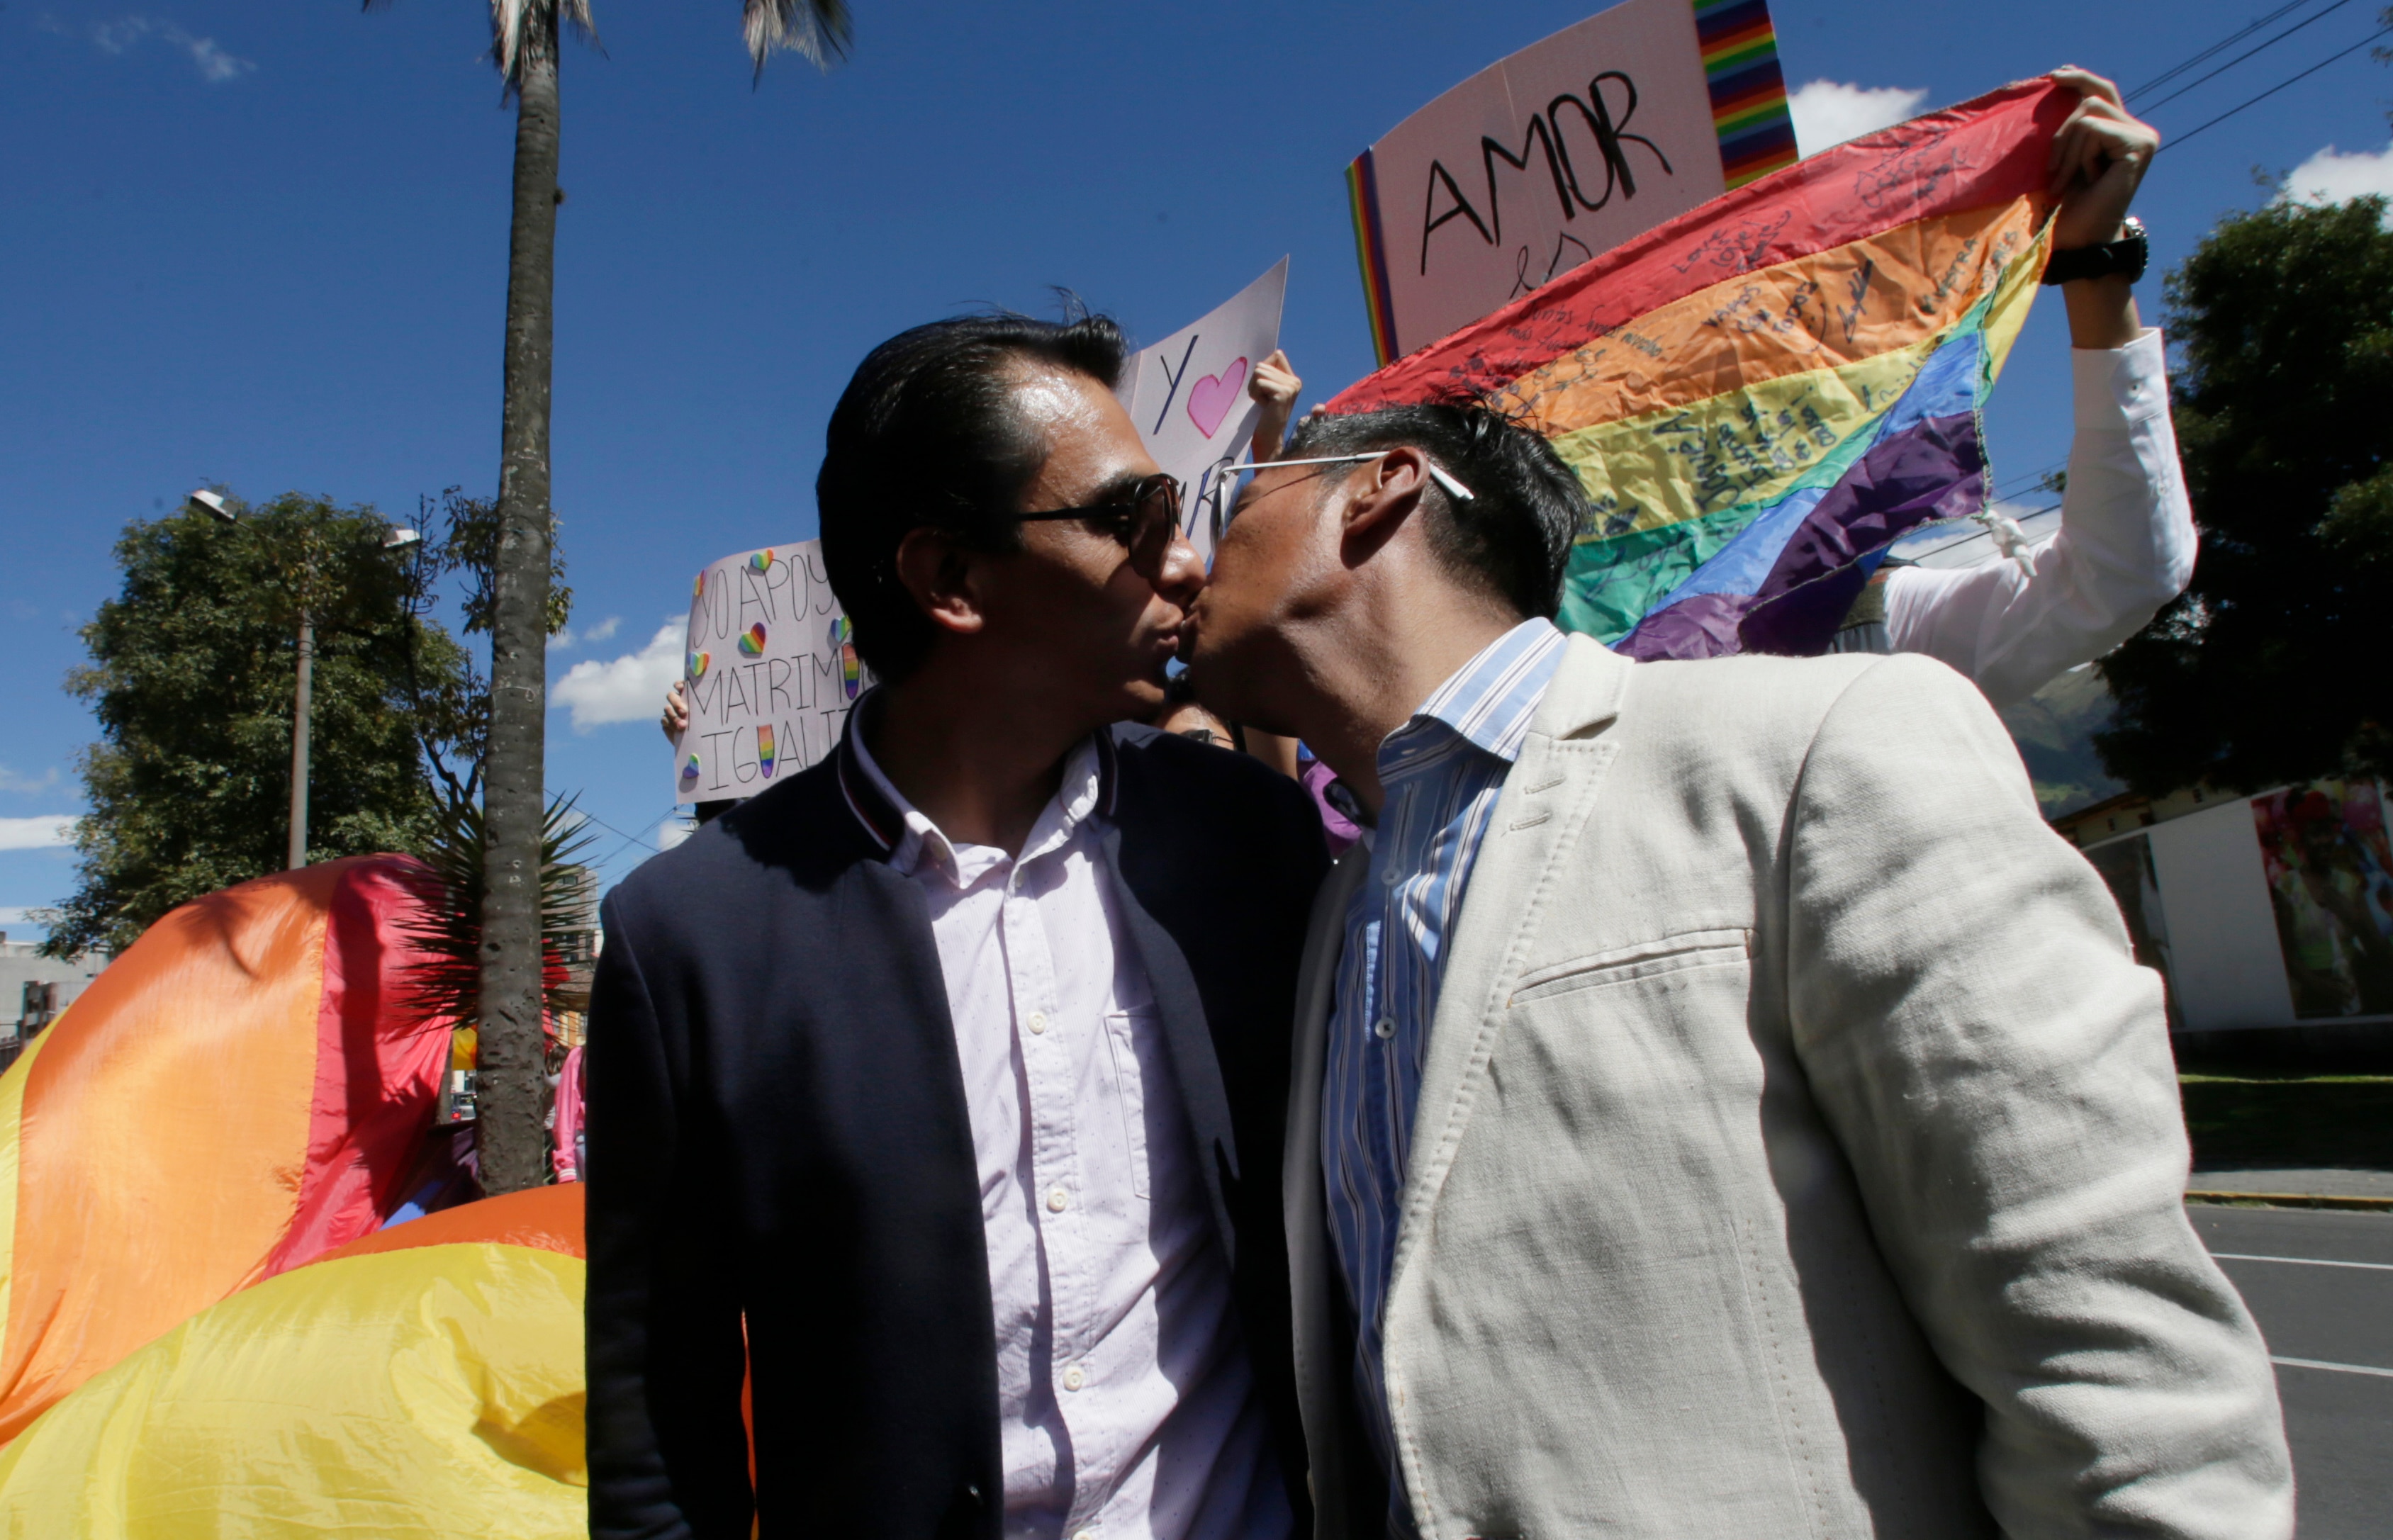 Javier Benalcazar, left, and his partner Efrain Soria kiss as they arrive to to know the final decision of the Constitutional Court.